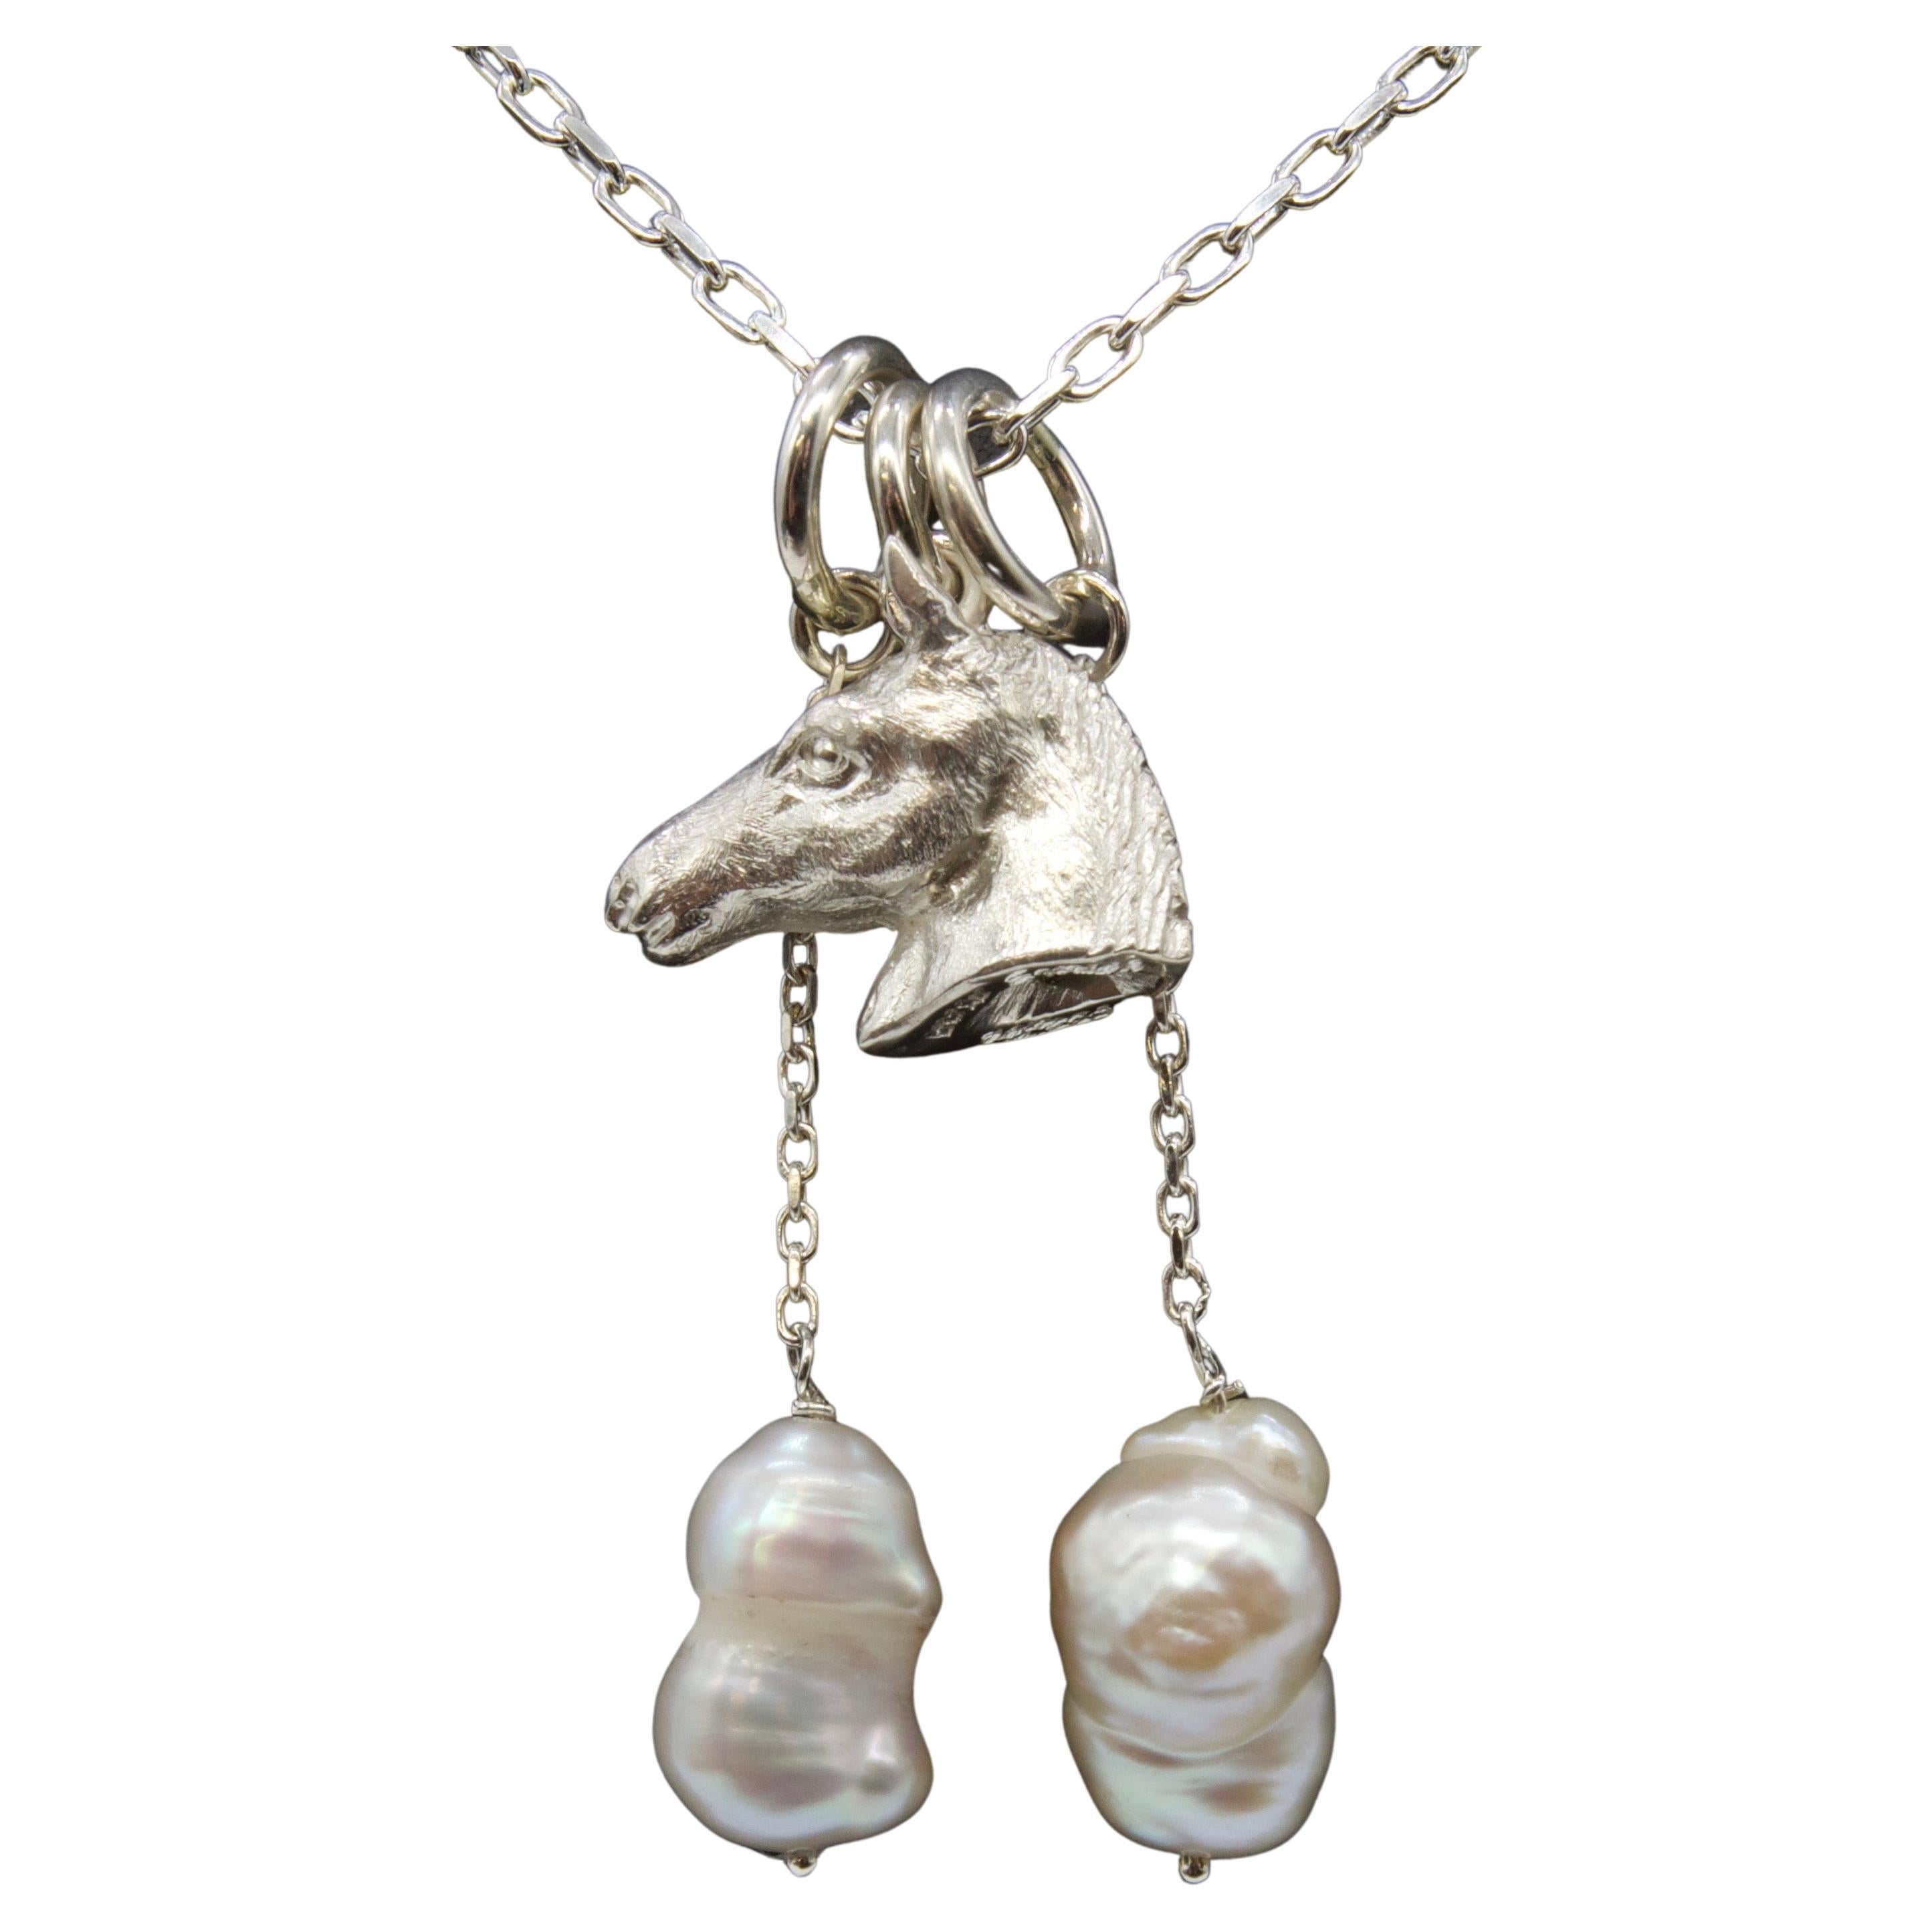 Paul Eaton Sculpted Horse Head Pendant with One or Two Pearl Drops